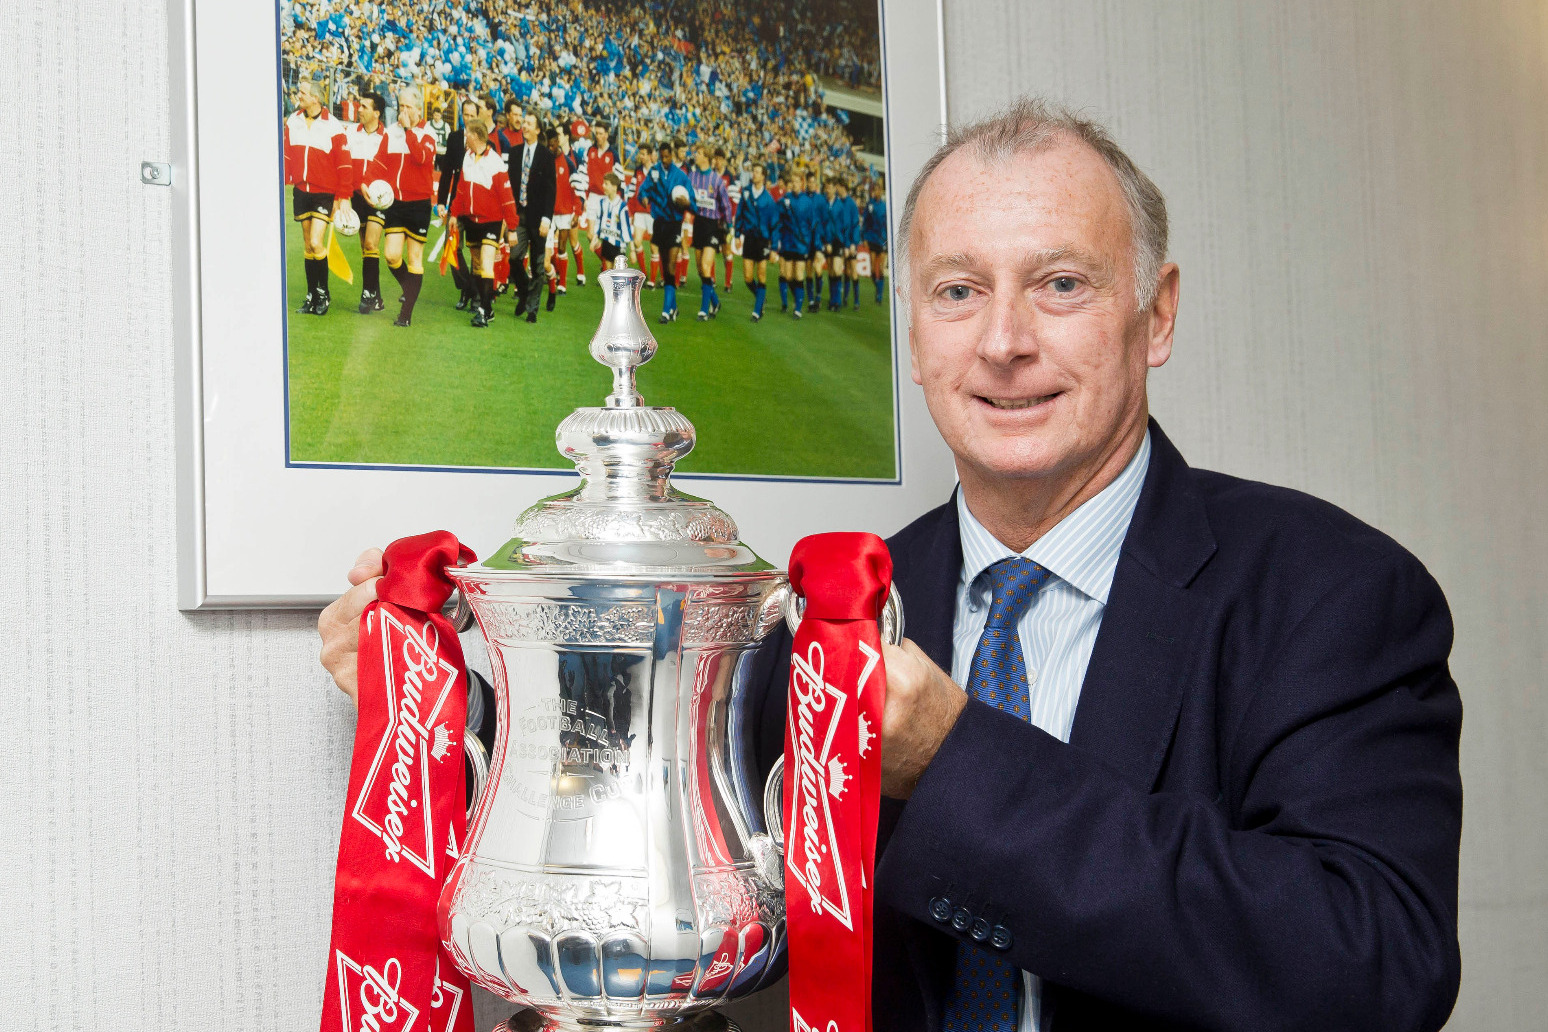 Former Nottingham Forest and England striker, Trevor Francis has died at the age of 69 